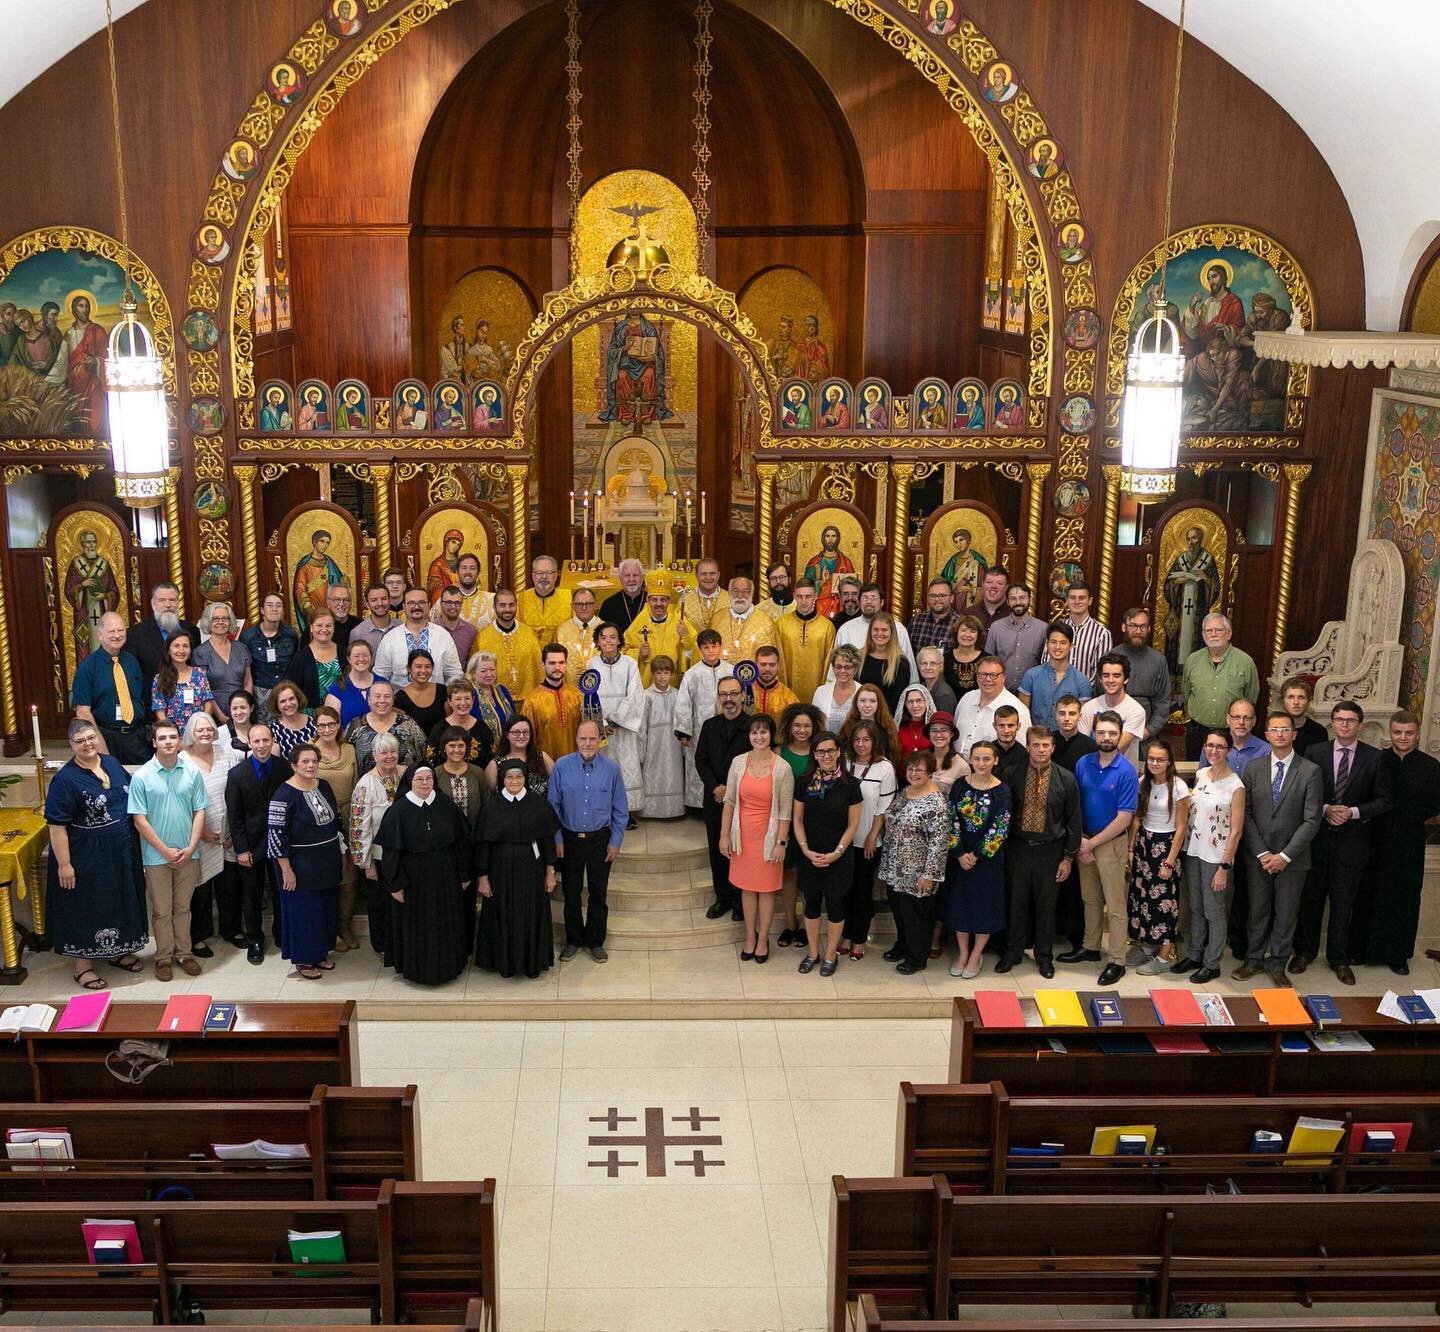 Photo taken after Divine Liturgy at #SingCon2019 before the departure of SingCon attendees!
#TBTSingCon